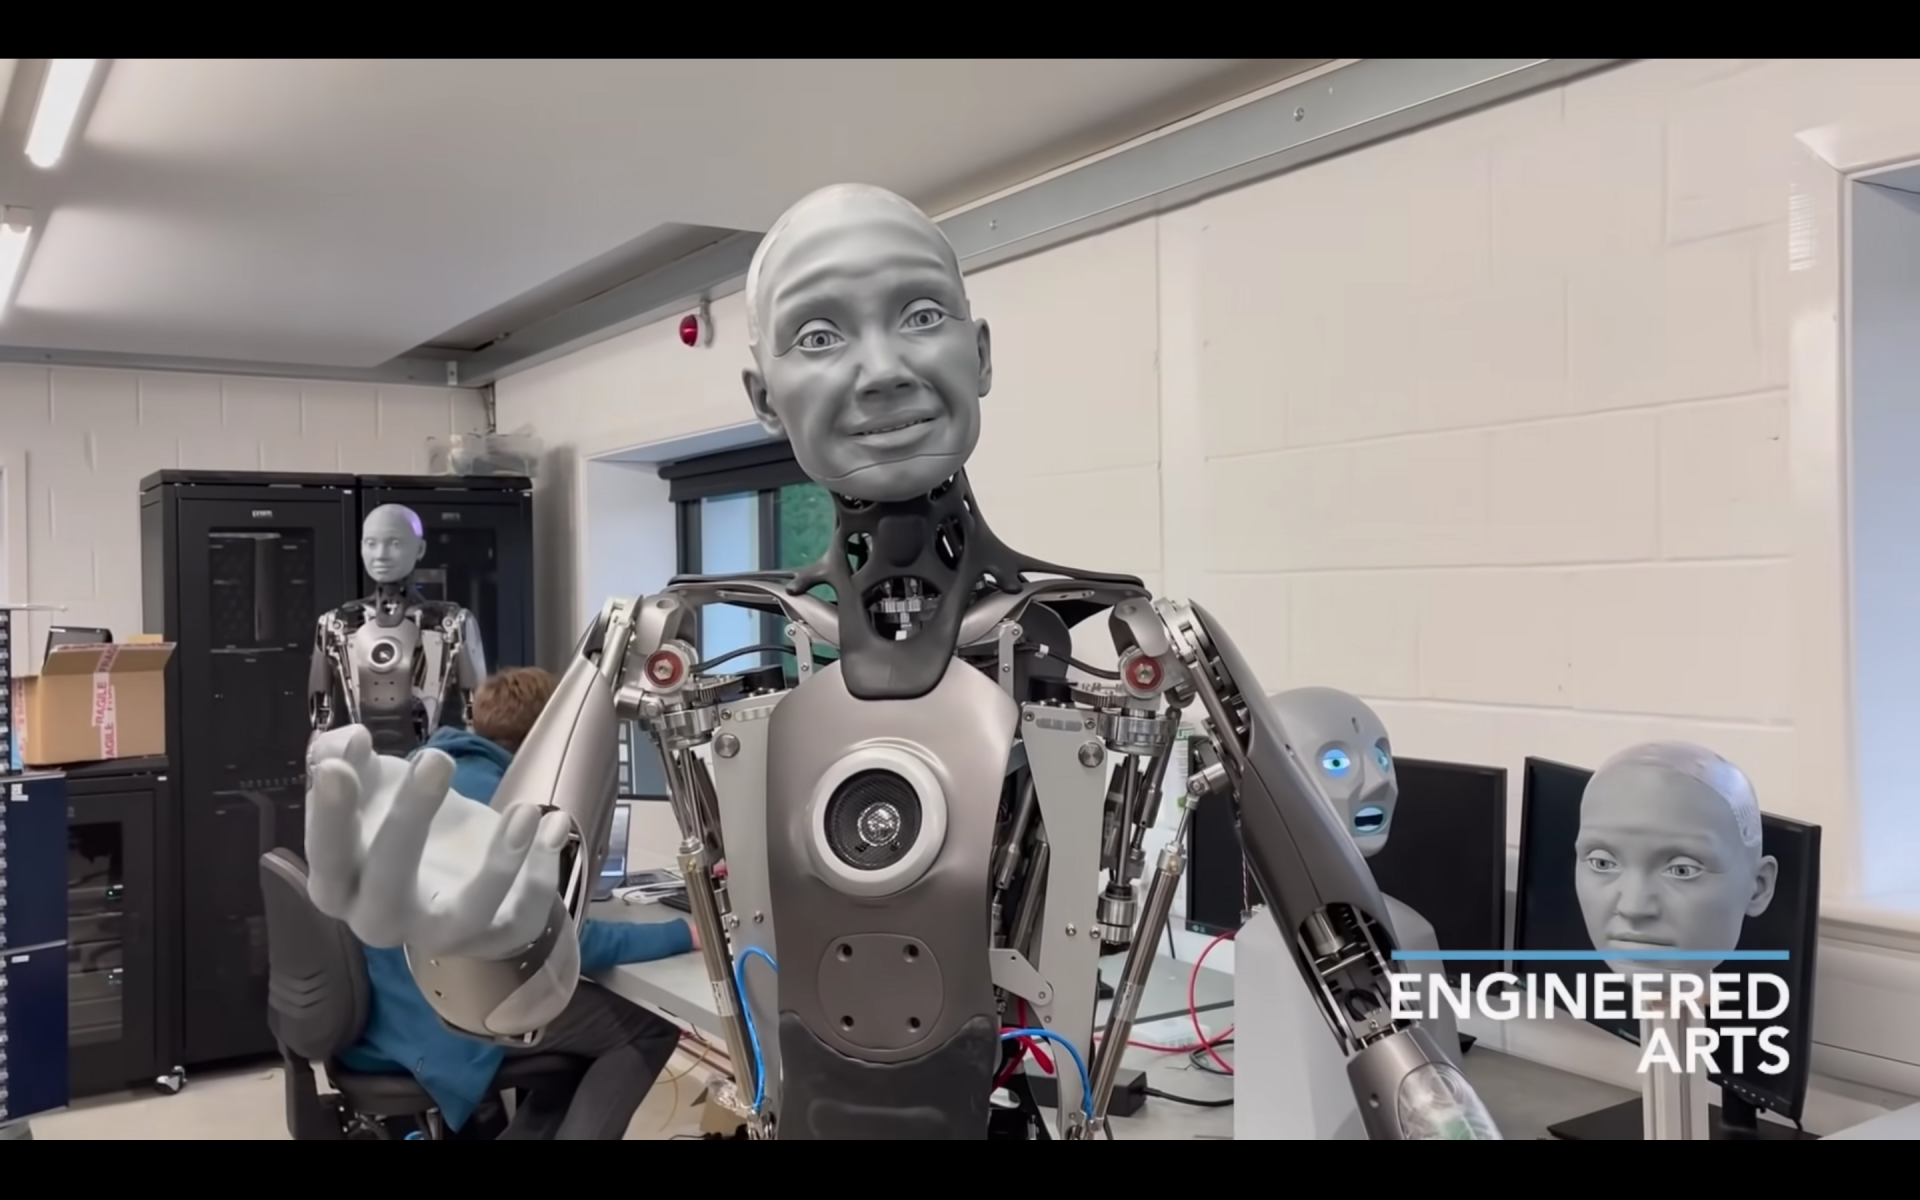 The bipedal humanoid robot, Ameca, looks at its hand in a stunningly humanlike way.